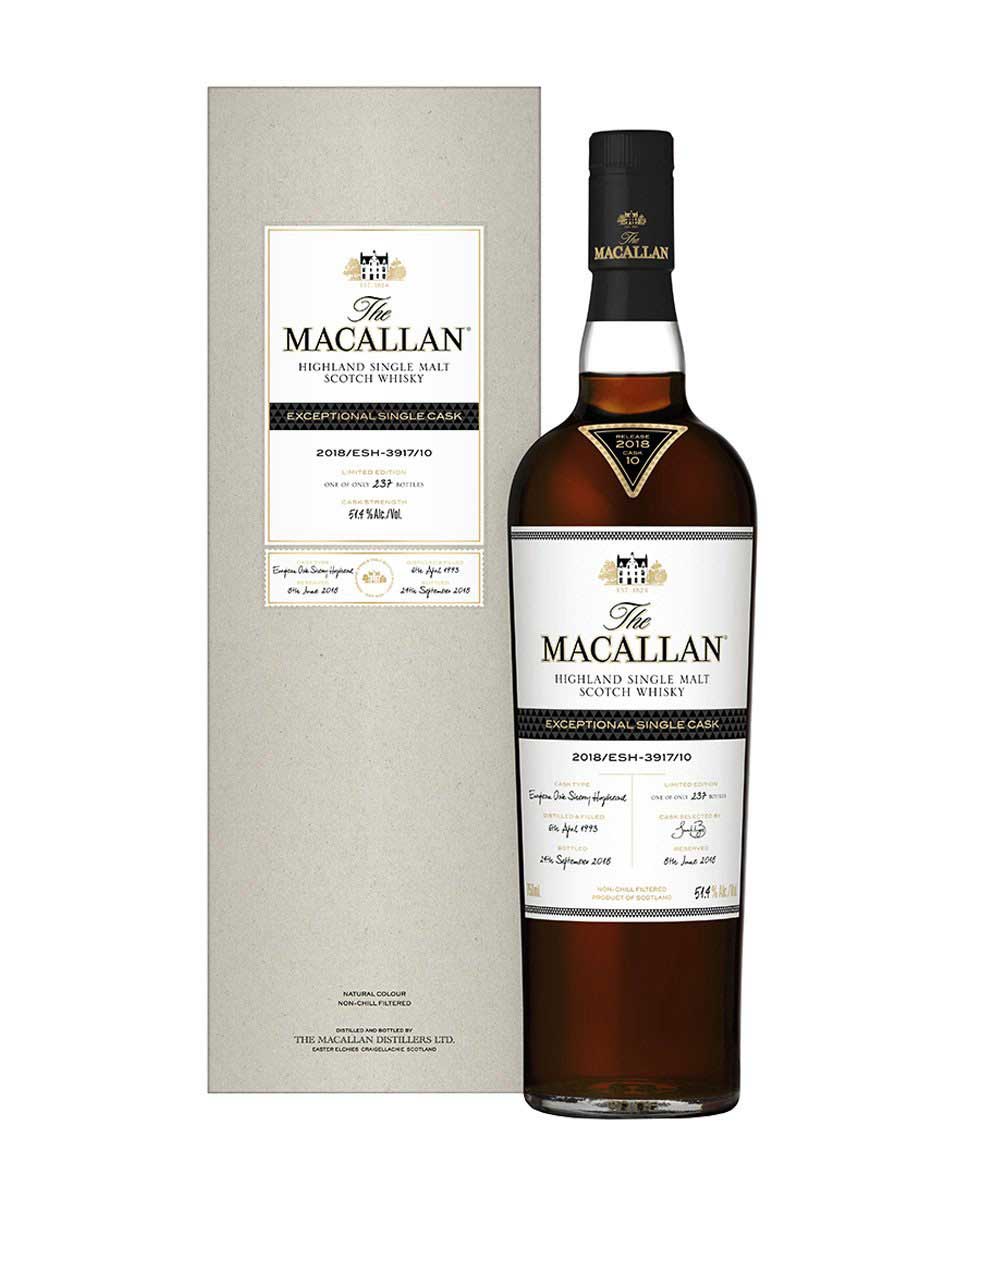 The Macallan 2018 Exceptional Single Cask No. 23